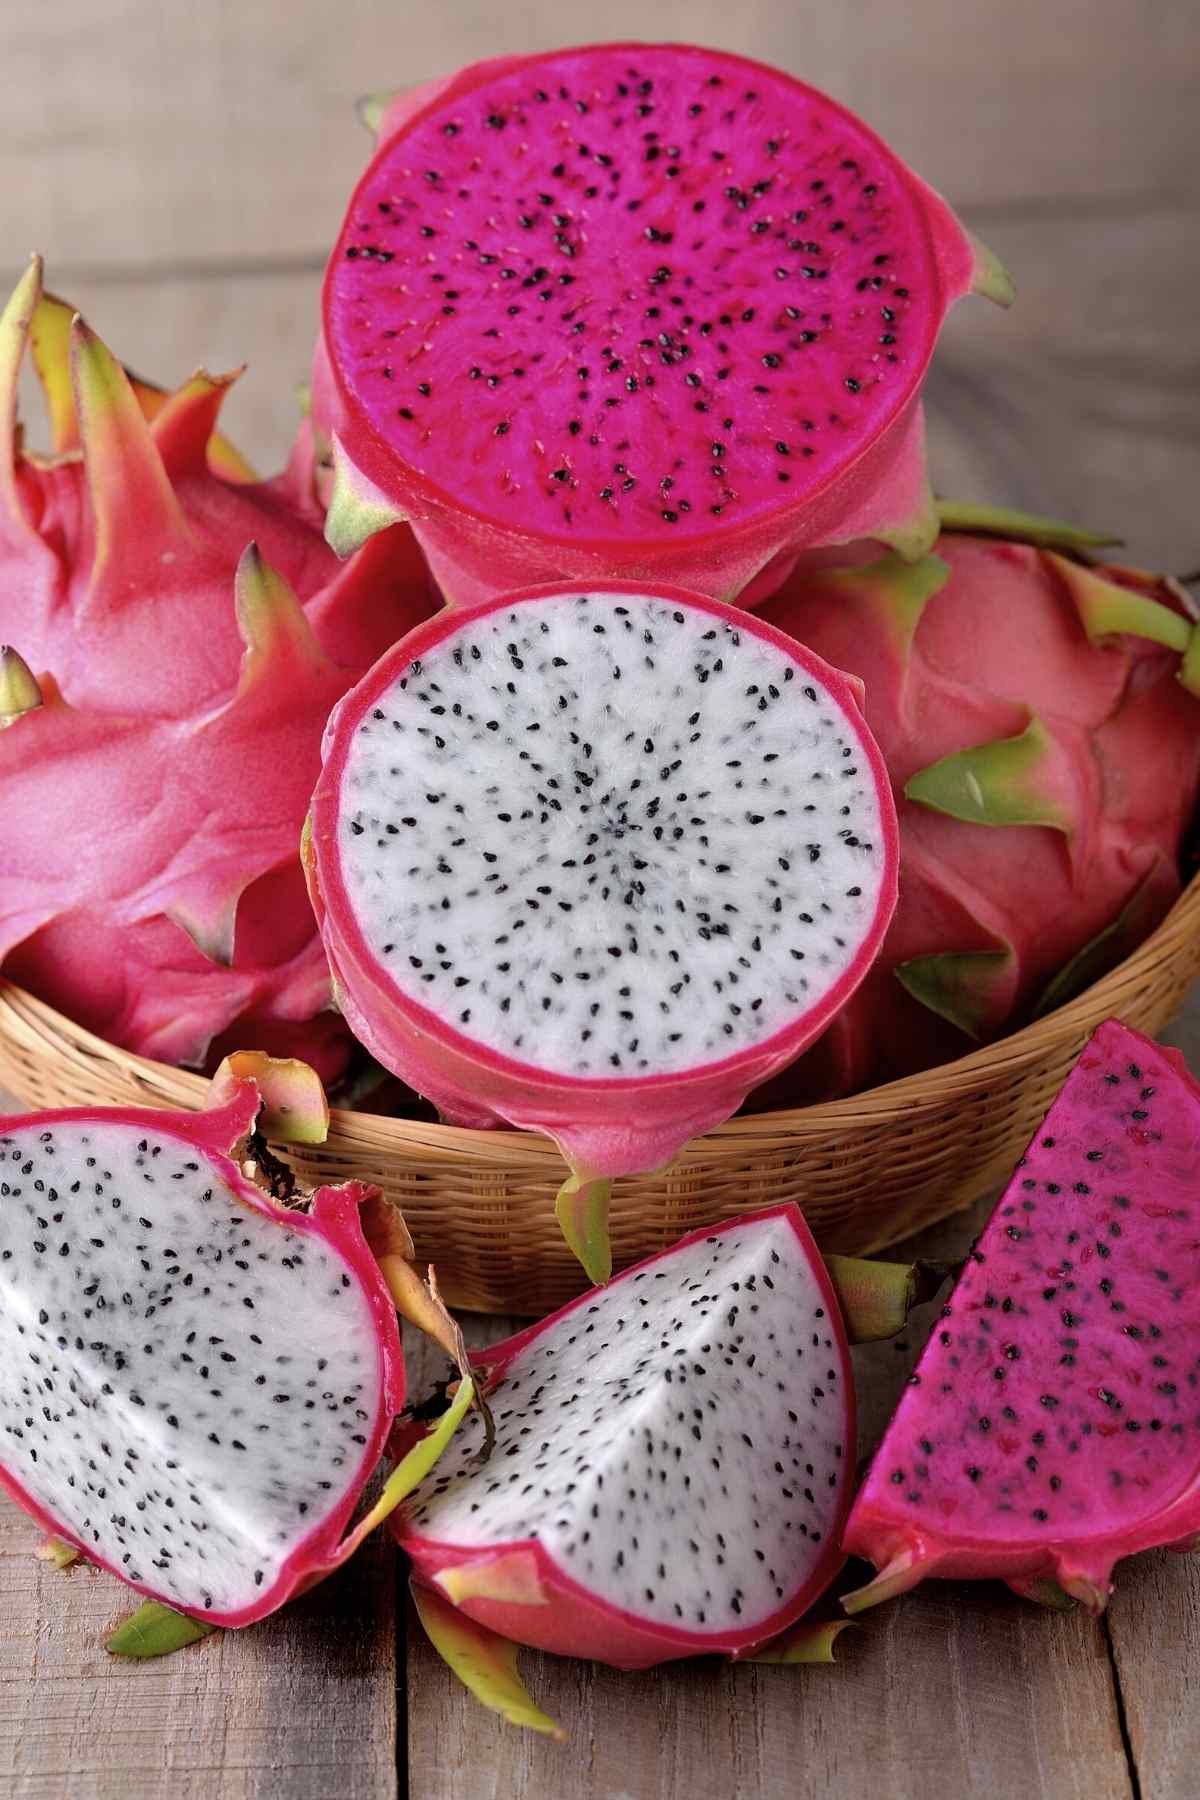 What Does Dragon Fruit Taste Like? It has a mildly sweet flavor with light citrus notes. People around the world can’t get enough of dragon fruits or pitaya, and neither can we! This tasty fruit is packed with antioxidants vitamin c, beta-carotene, and lycopene.